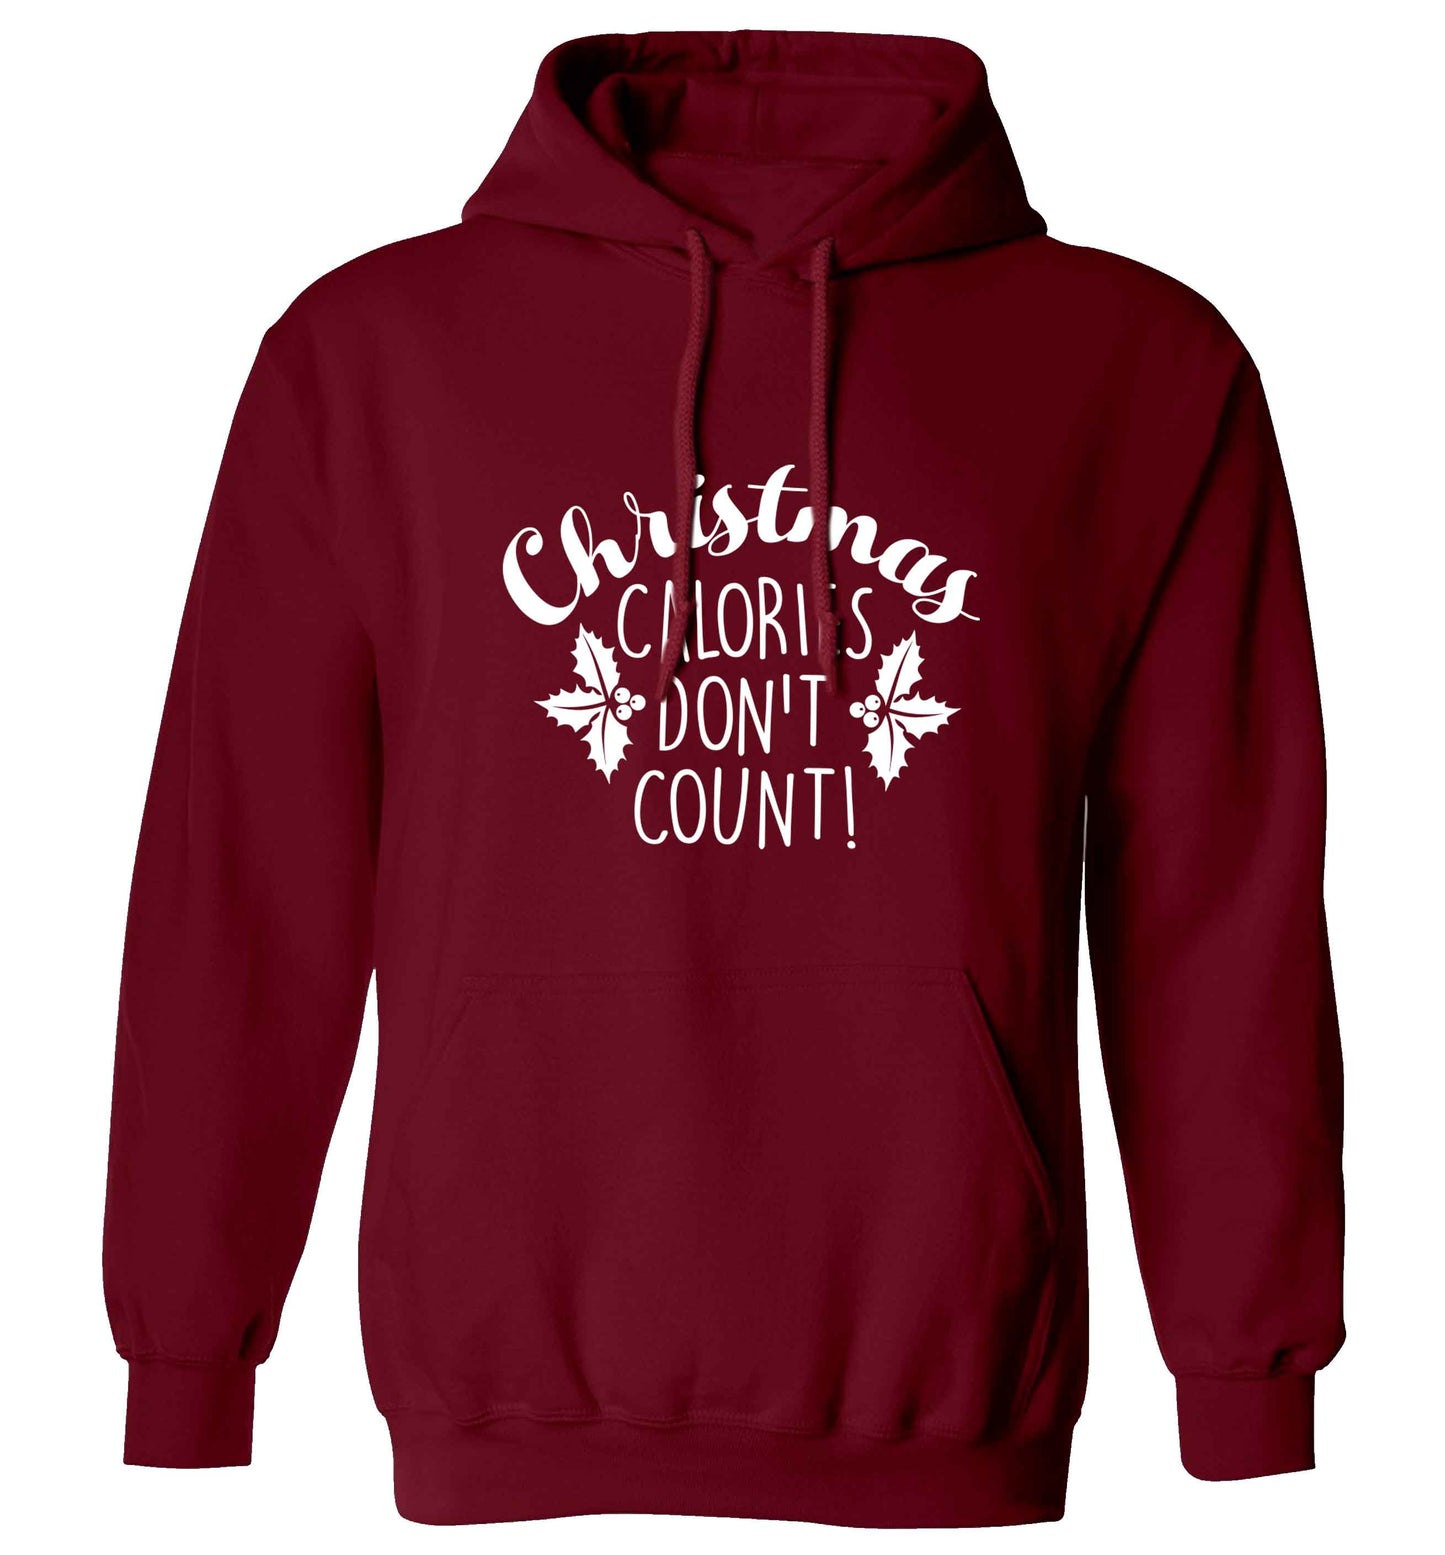 Christmas calories don't count adults unisex maroon hoodie 2XL